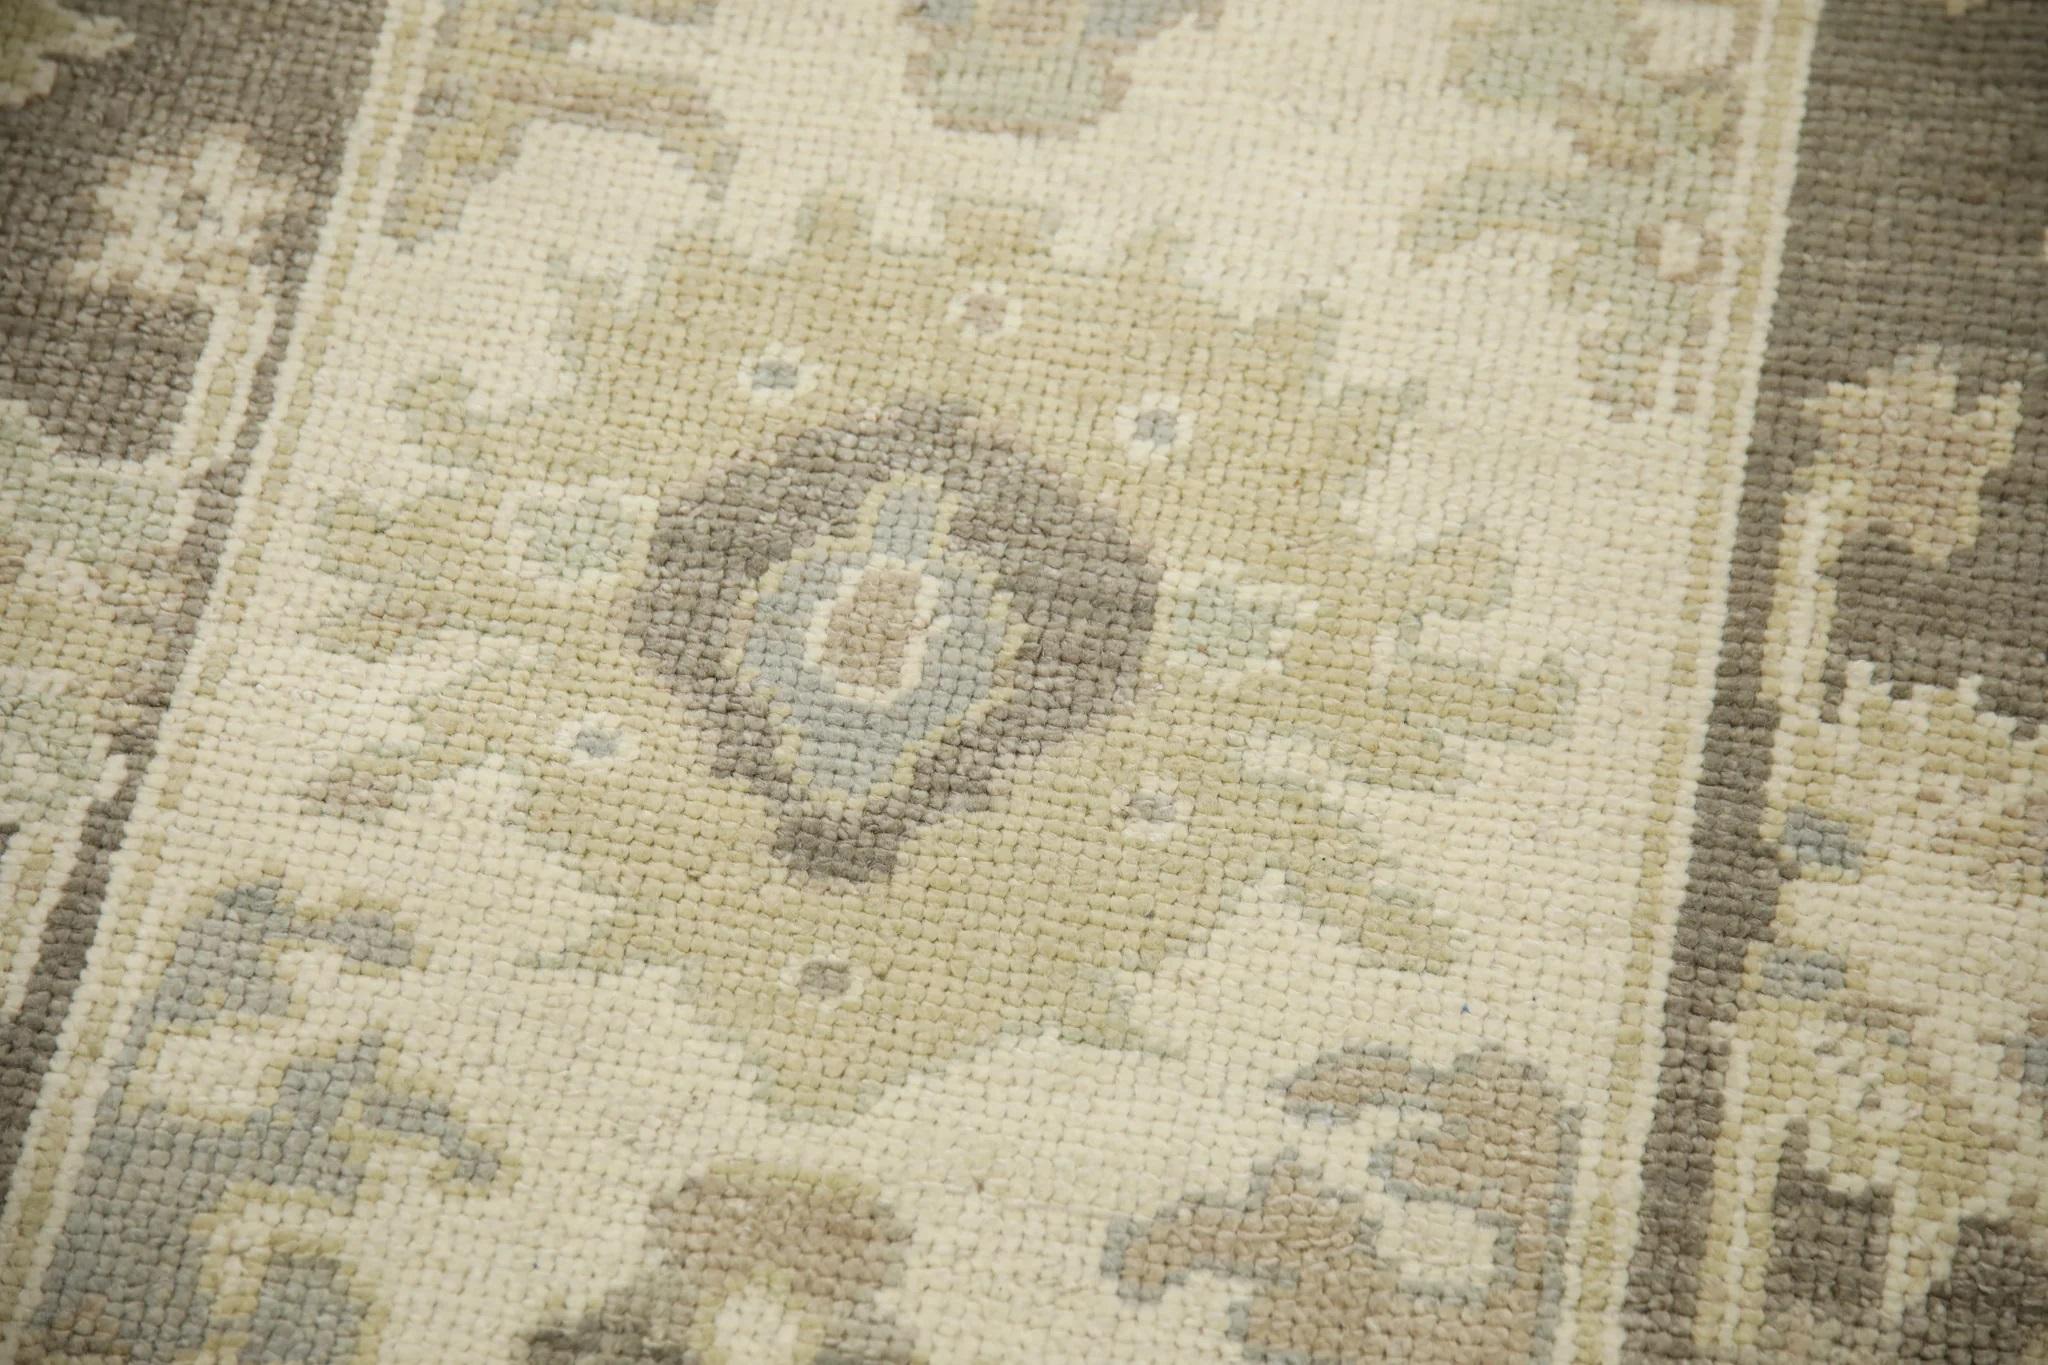 Modern Floral Design Handwoven Wool Turkish Oushak Rug in Brown and Green 2'10